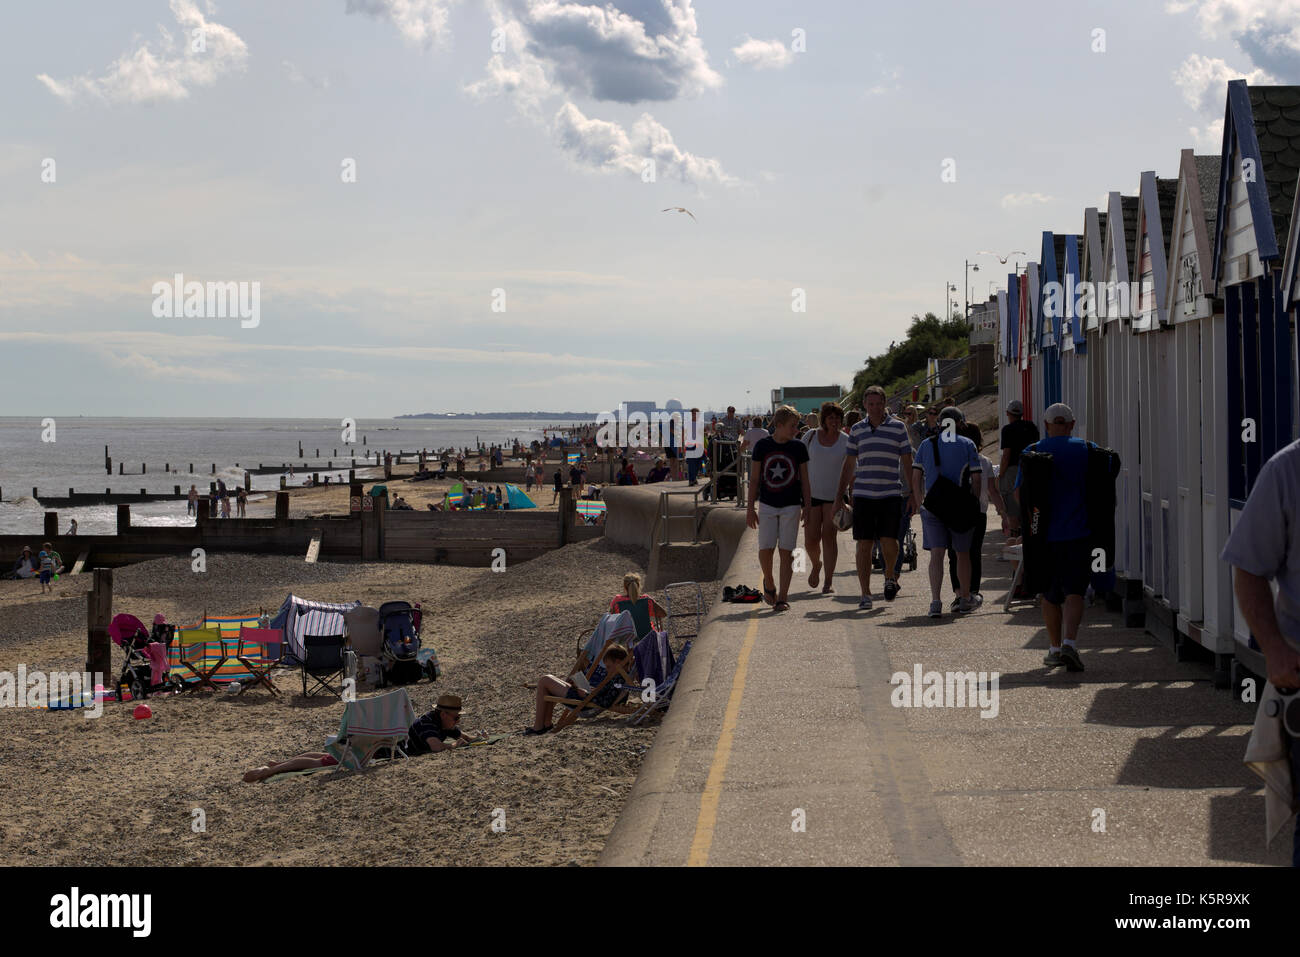 Southwold seaside resort village in Suffolk, England, in August 2017, with the dome of Sizewell nuclear power station on the distant horizon Stock Photo